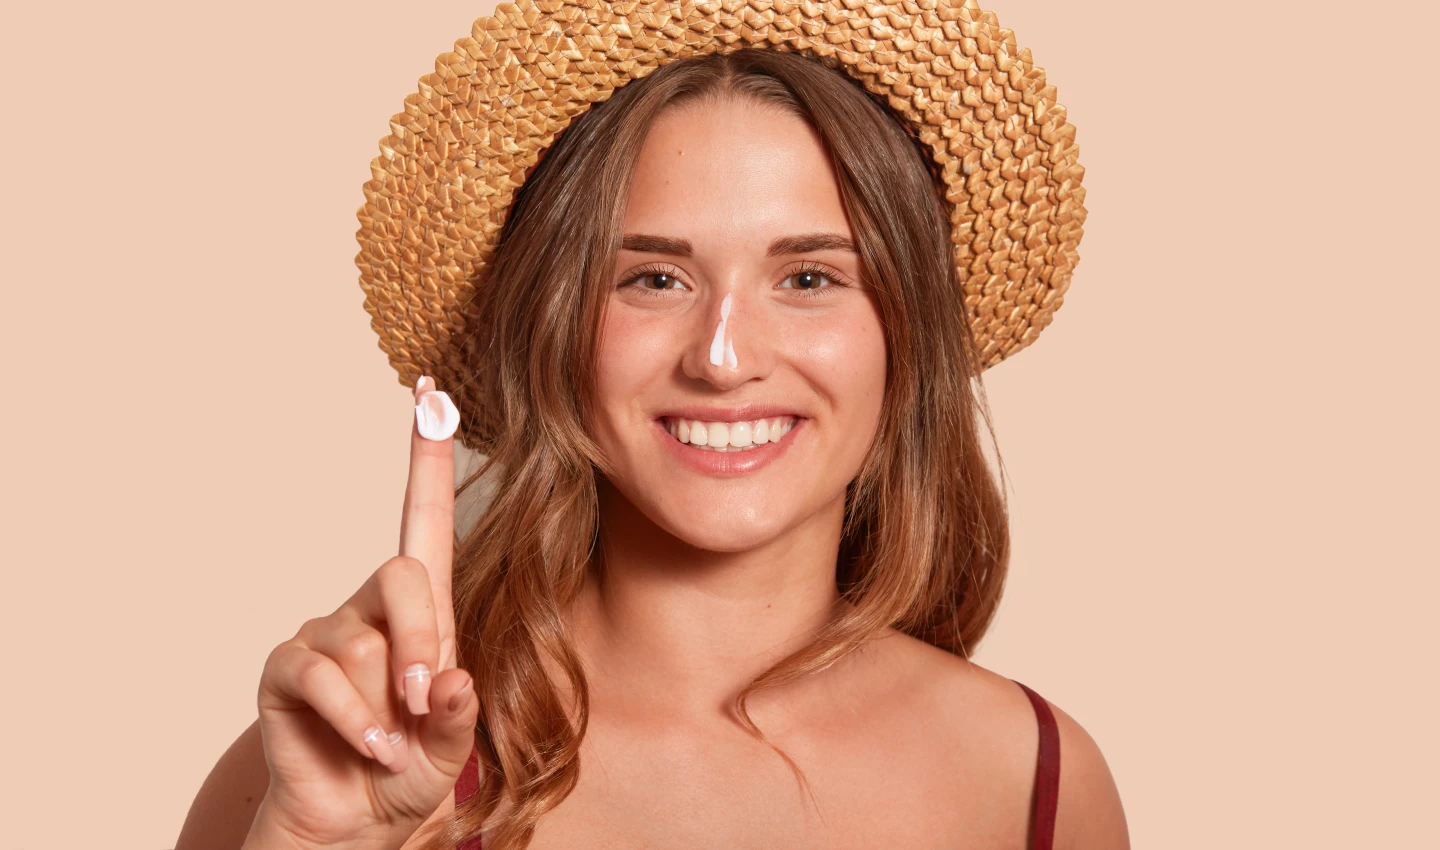 Woman applying sunscreen on her face with a smile, demonstrating the importance of choosing the right sunscreen for your skin type.